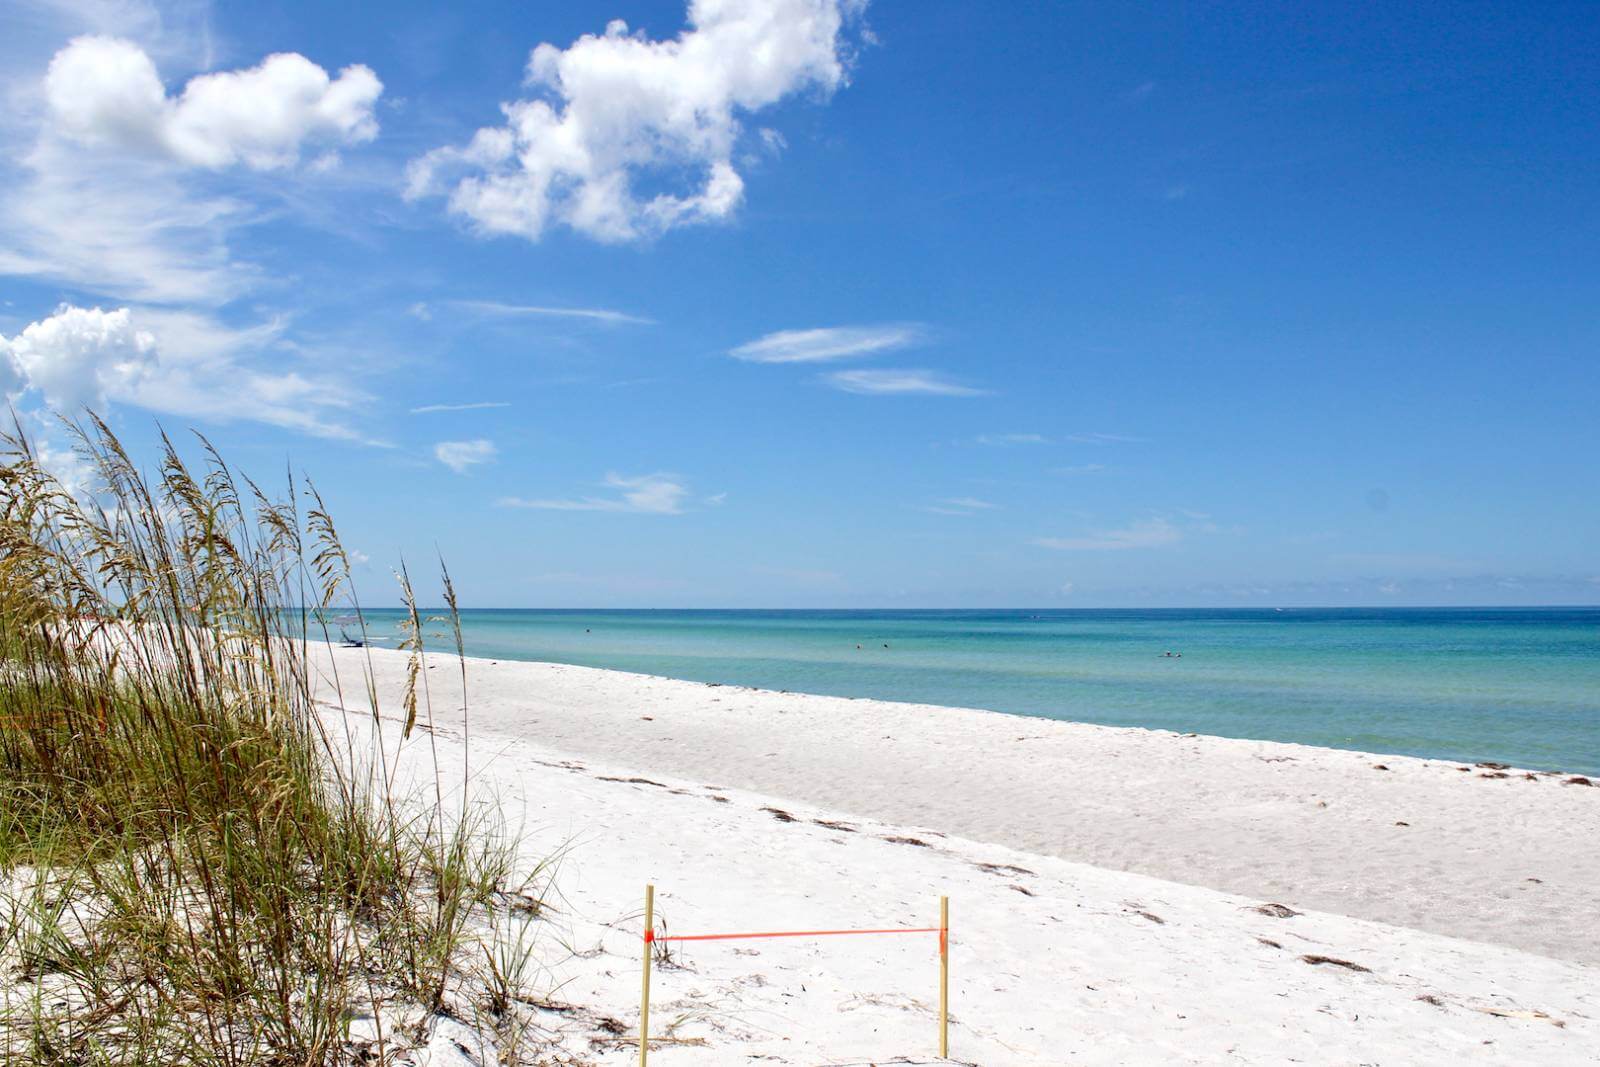 White sand beach and blue waters of the Gulf of Mexico off the coast of Southwest Florida USA. Photo by Nita Ettinger | Must Do Visitor Guides, MustDo.com